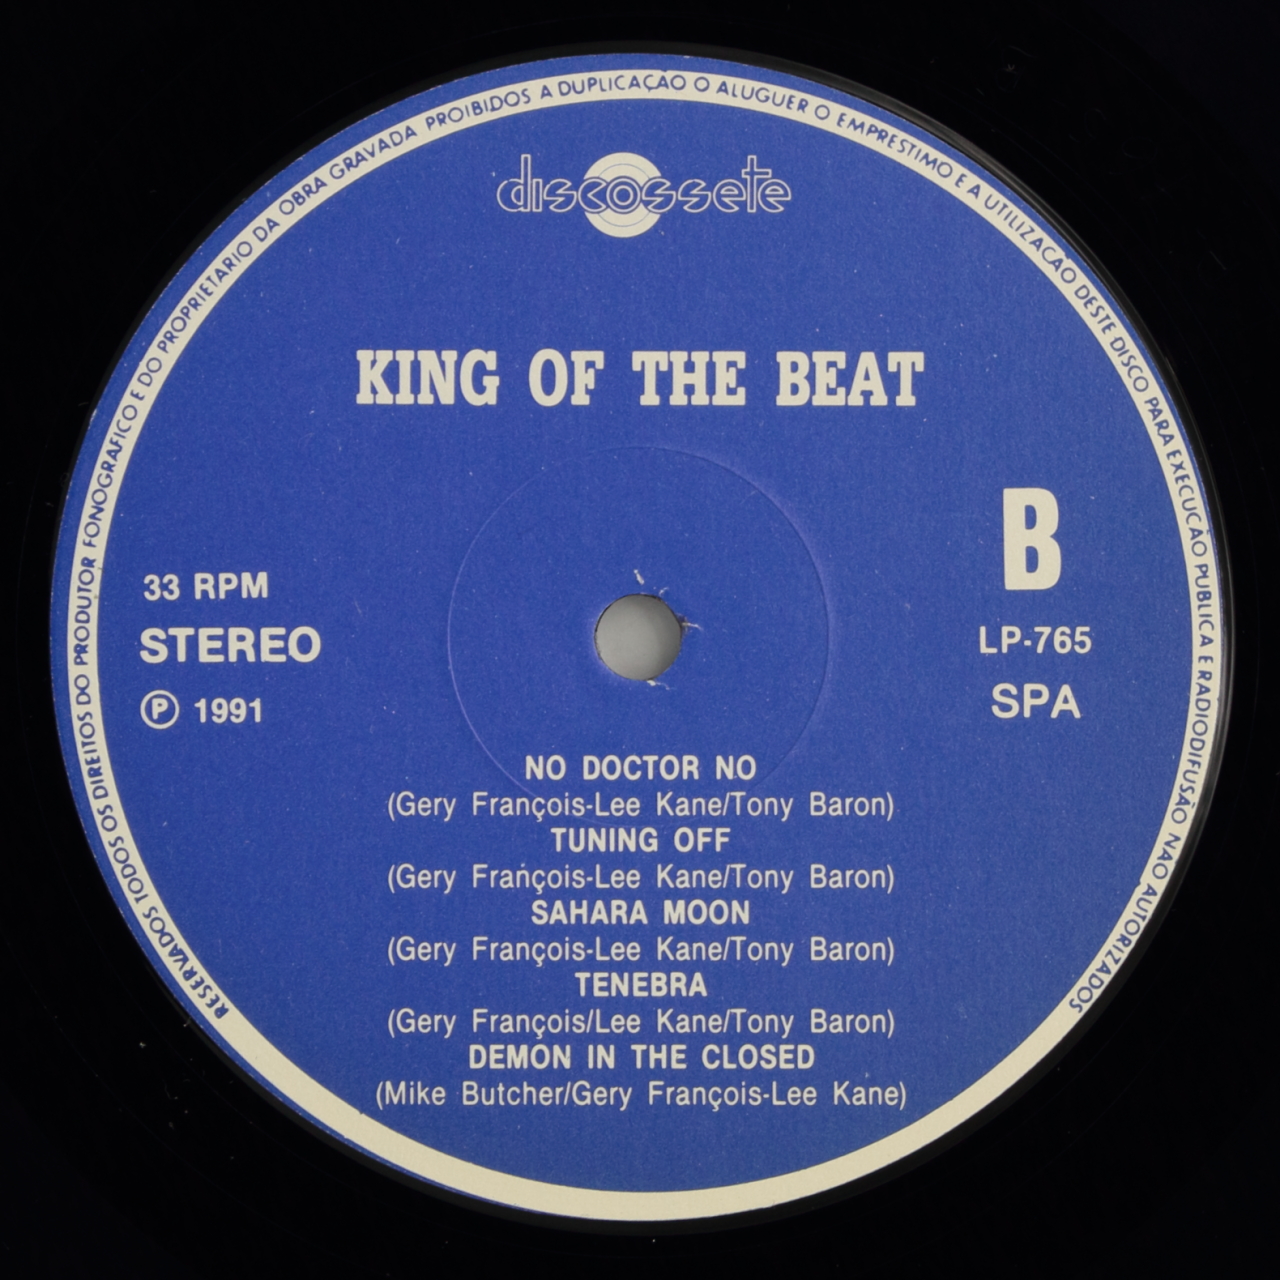 King of the Beat